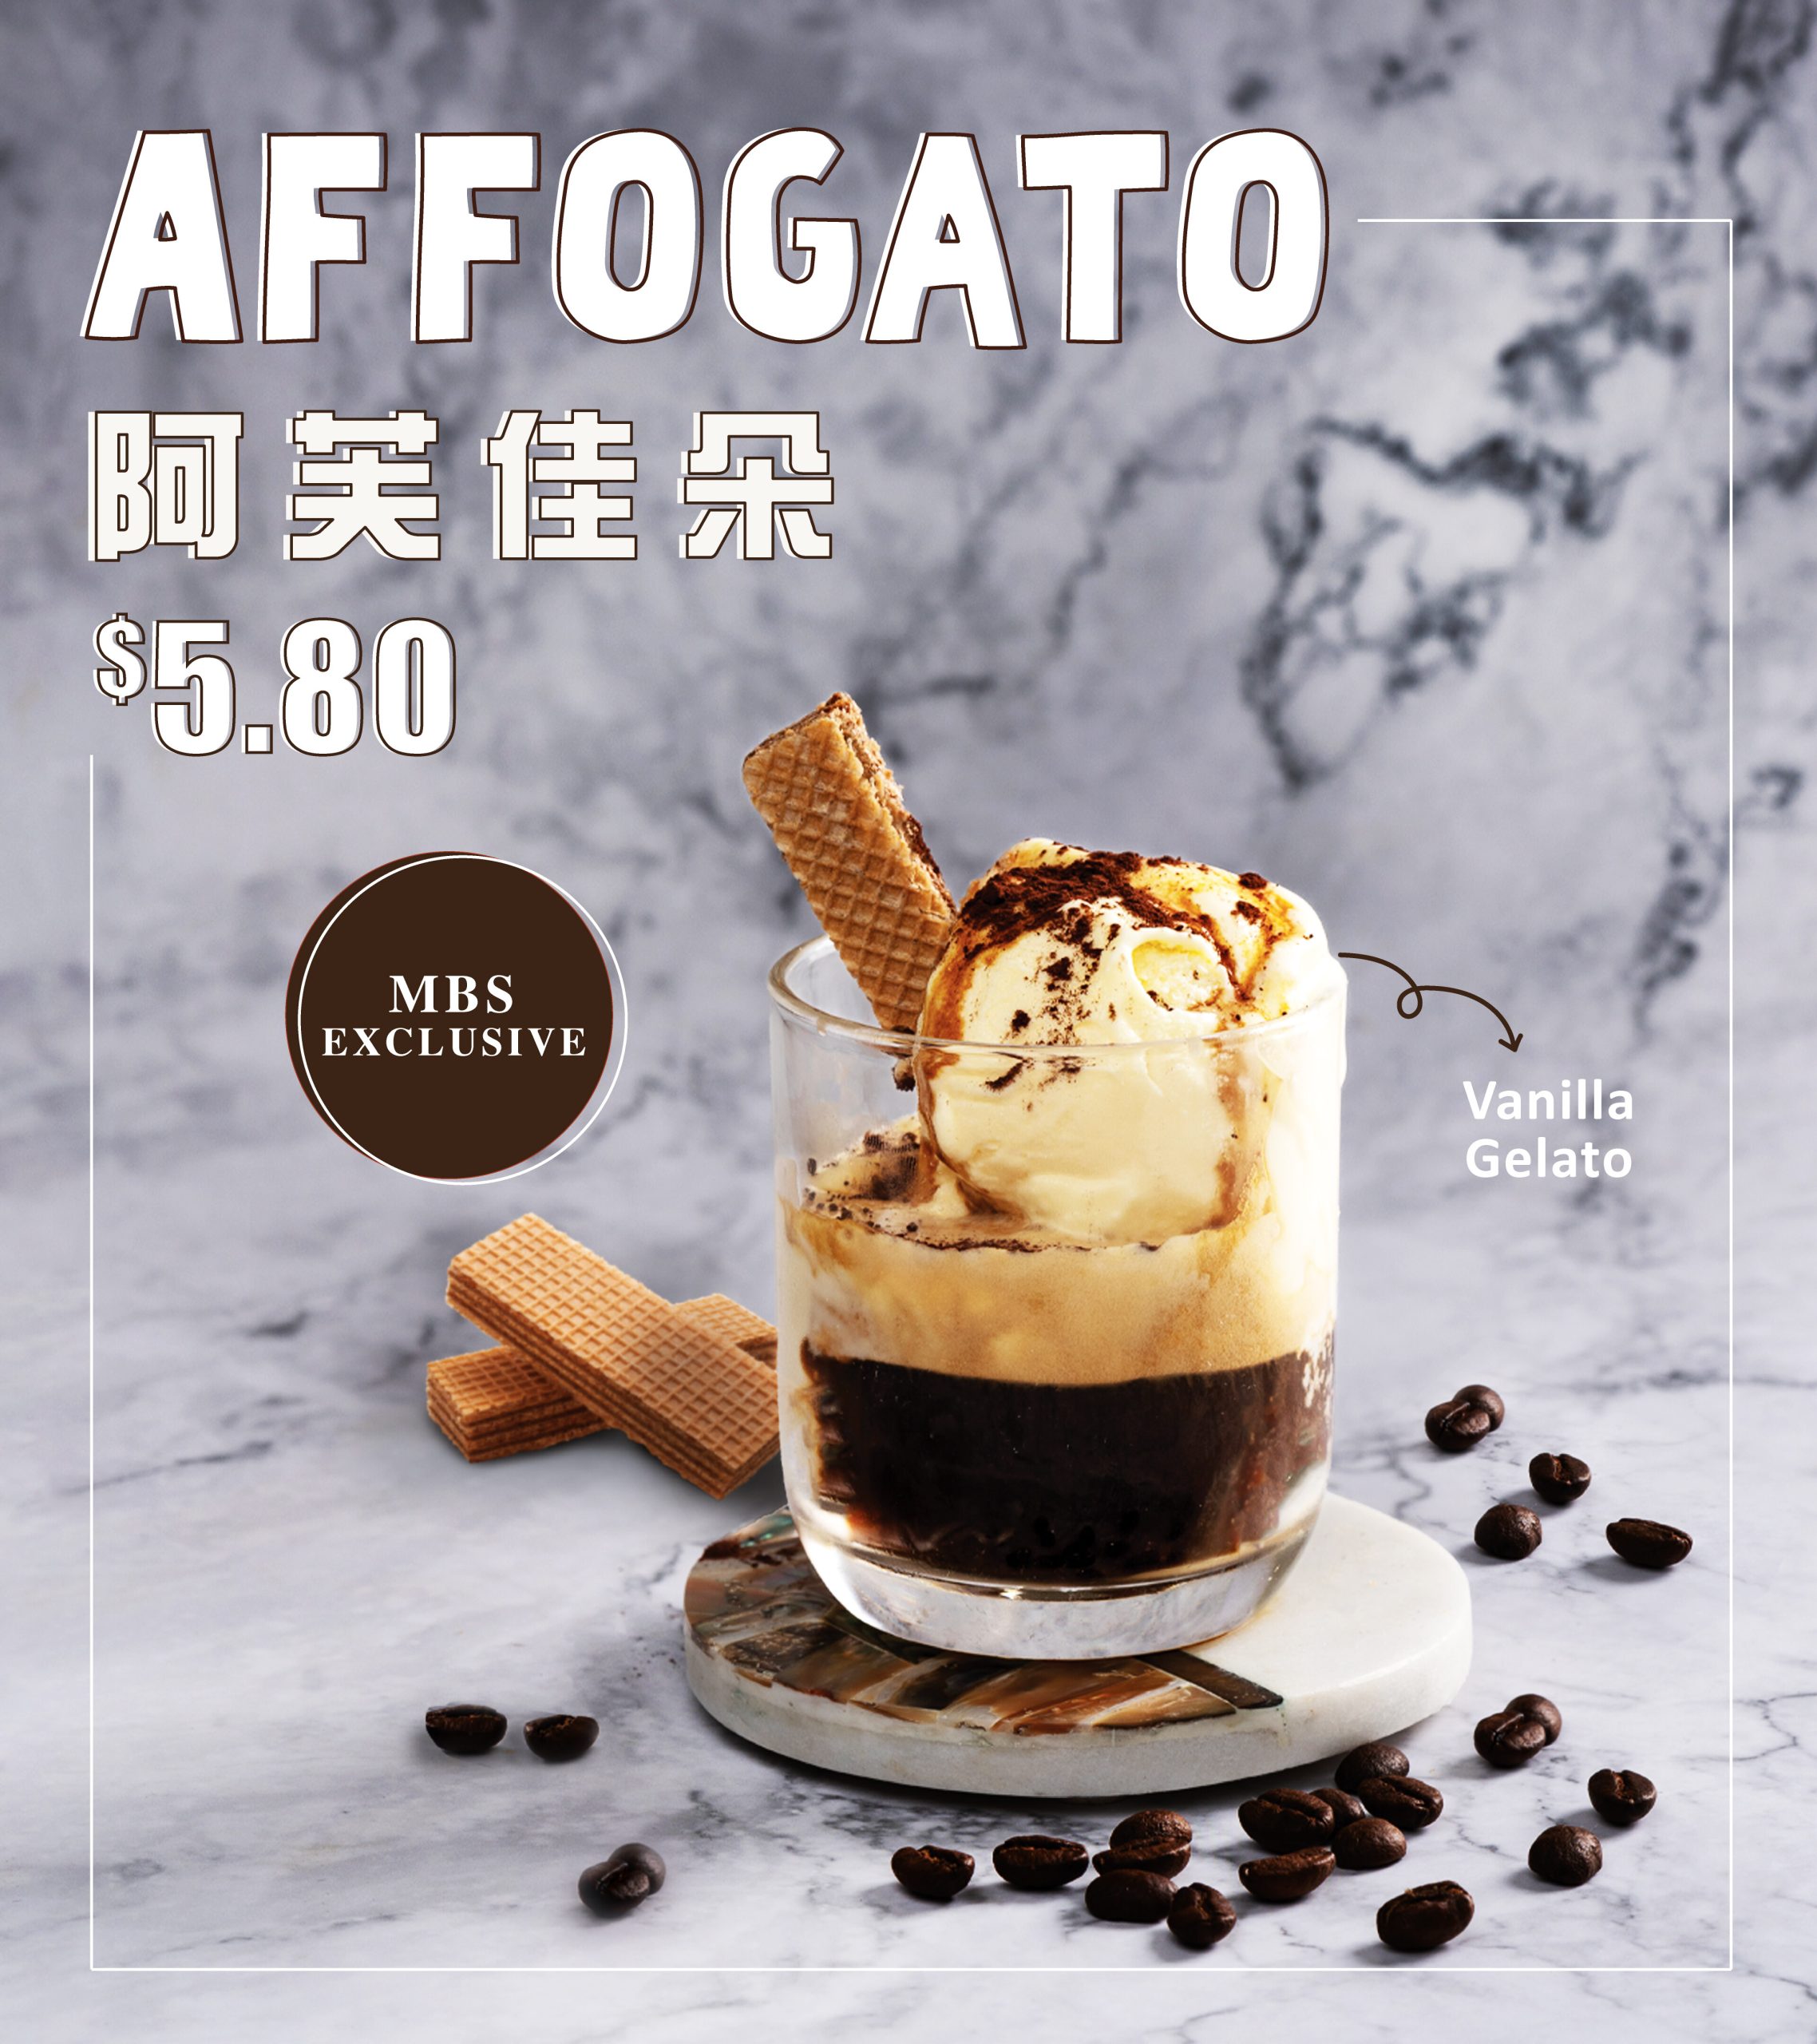 MBS Exclusive: Affogato